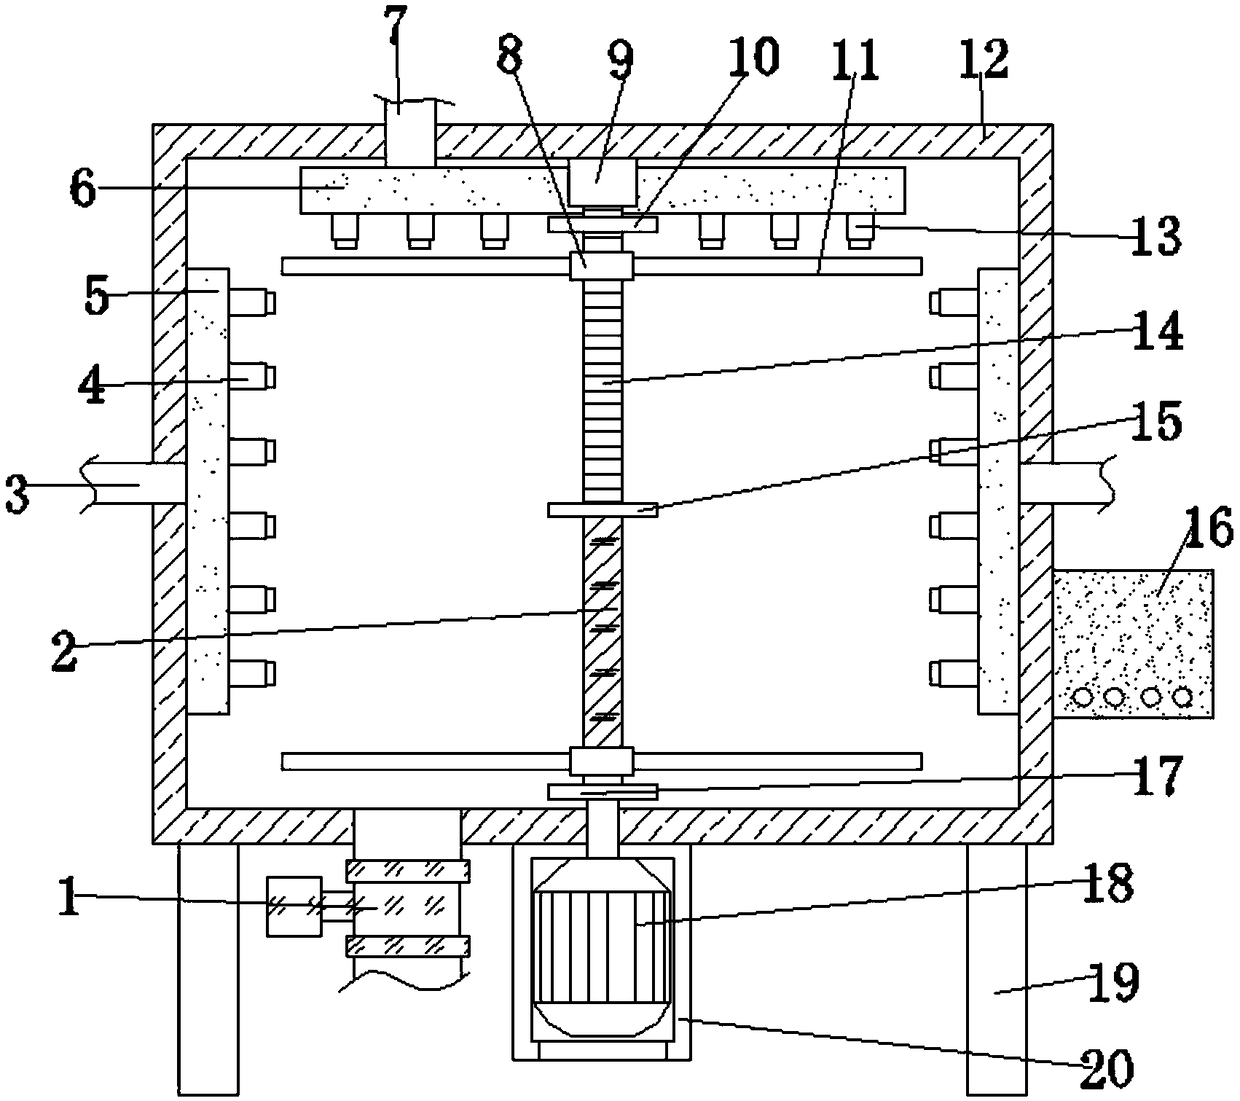 High-mixing-degree stirring device for medicine production